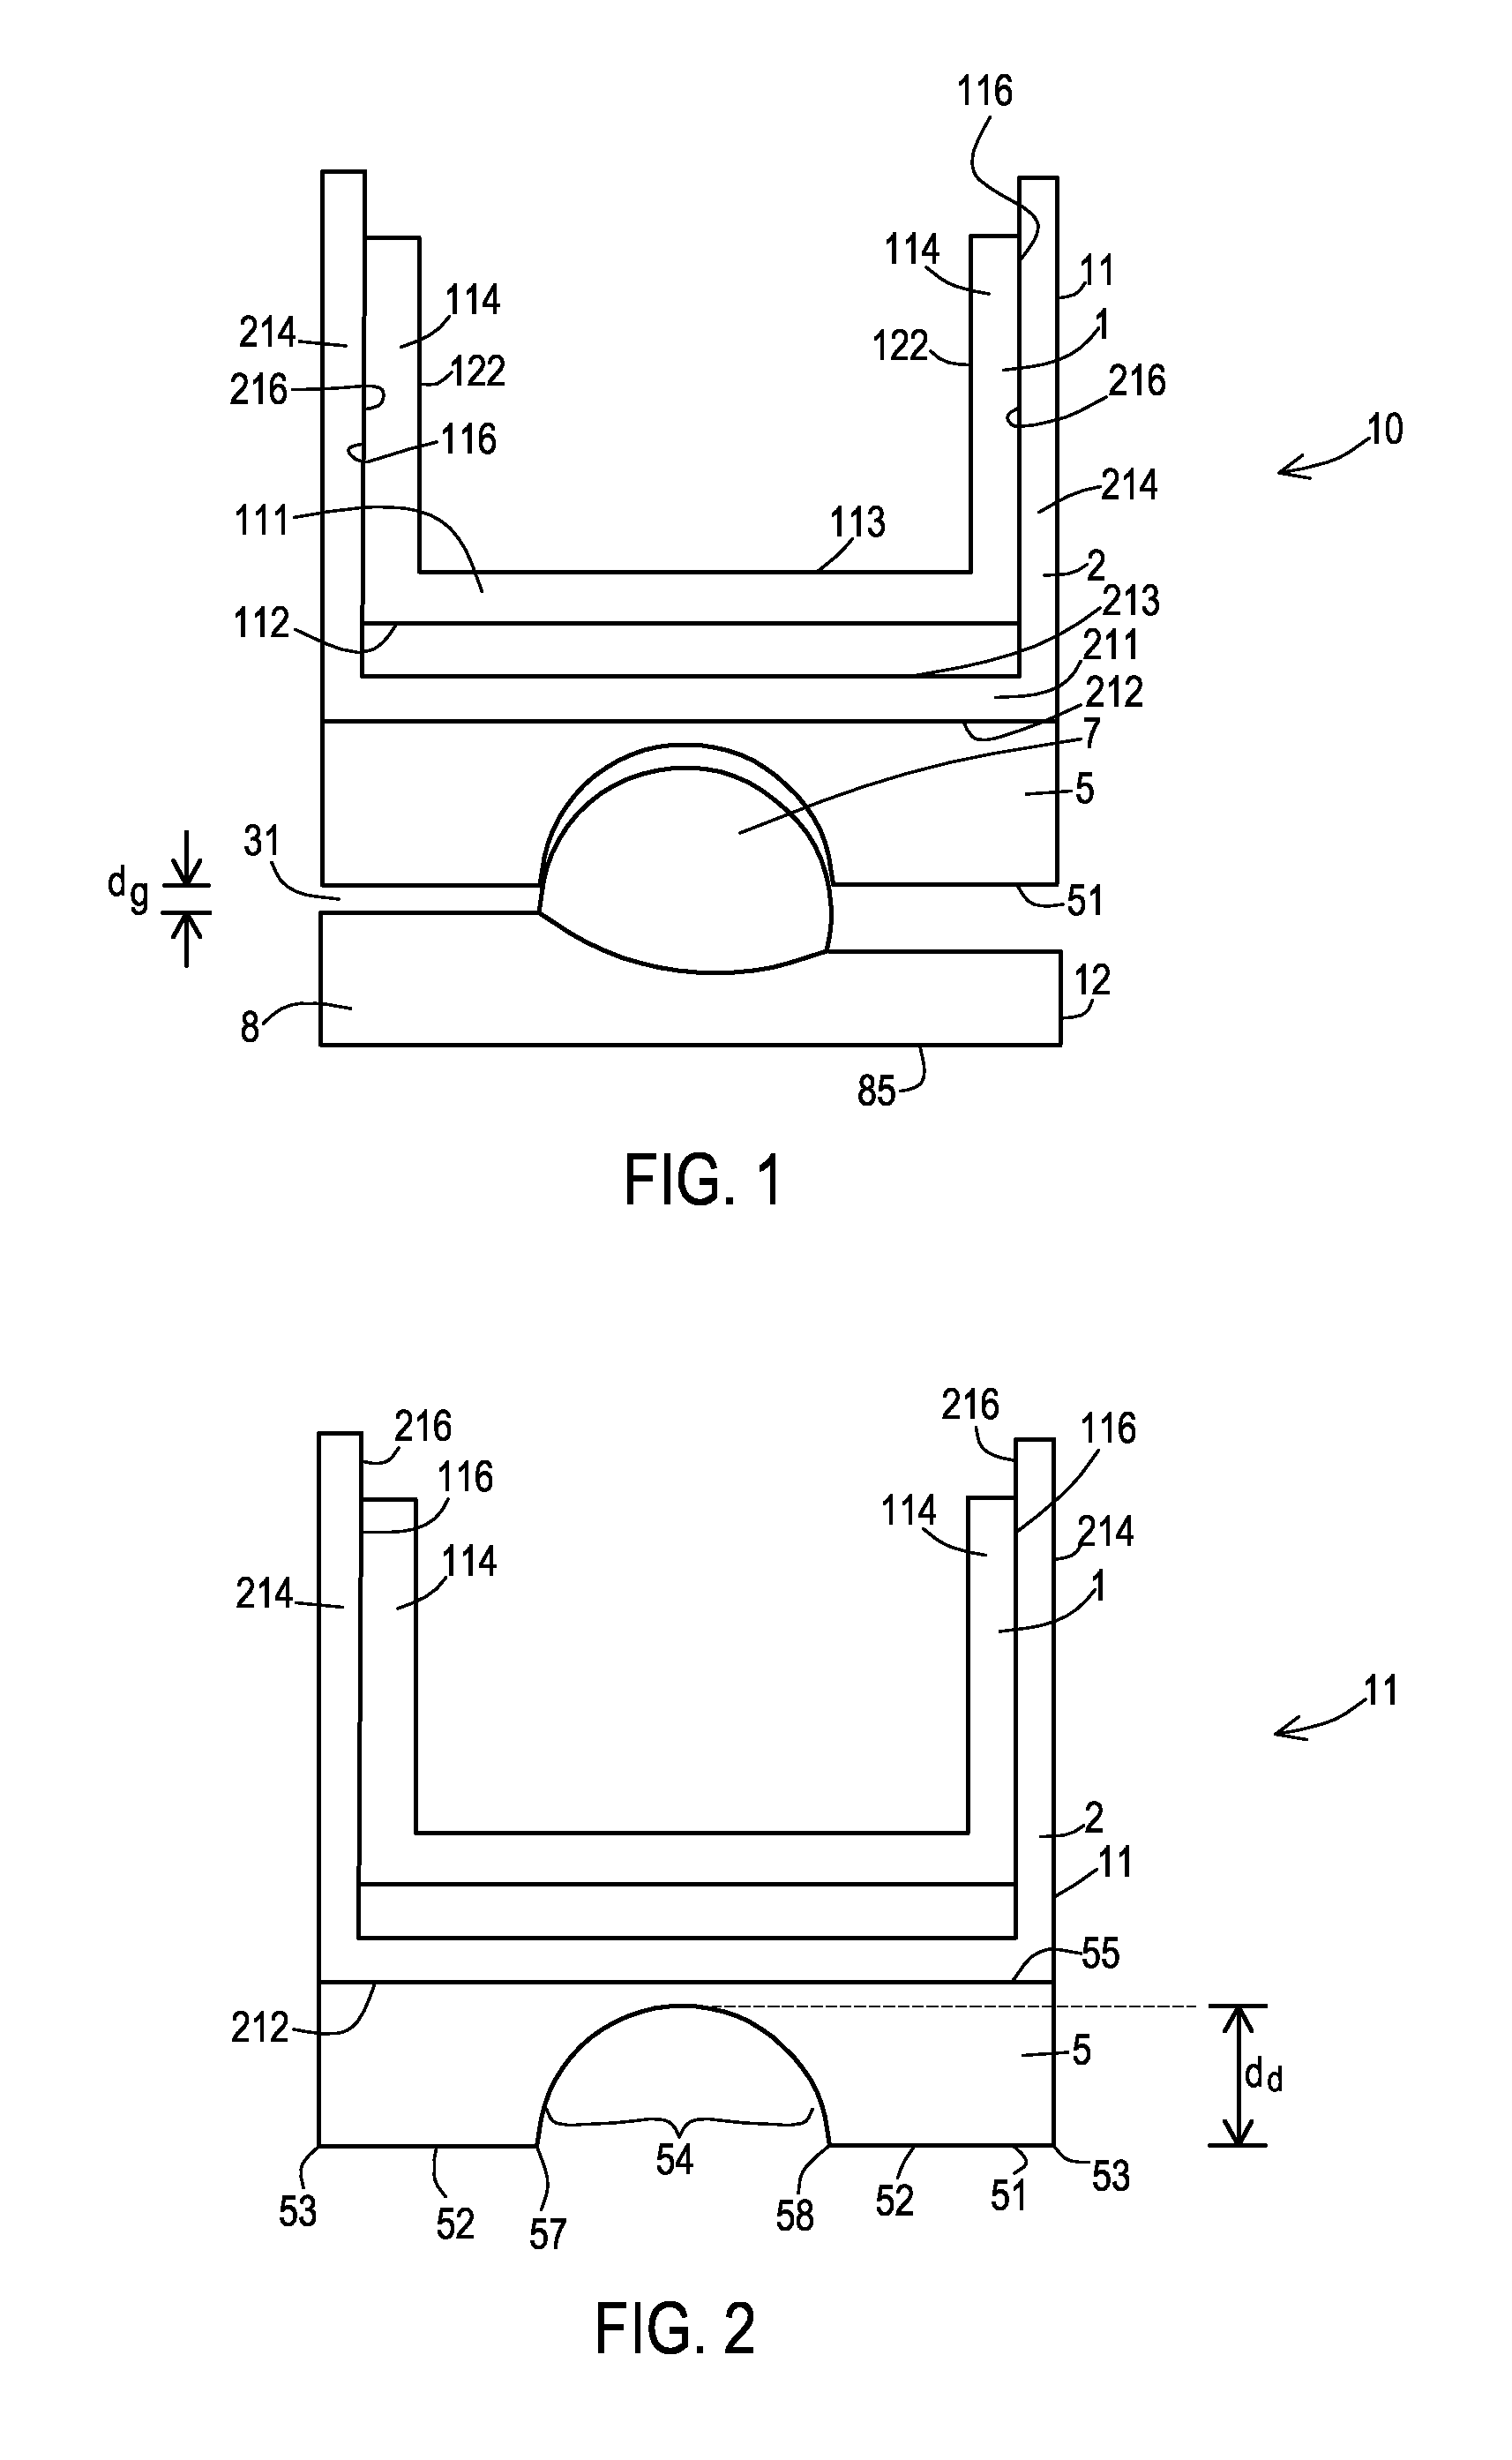 Ankle replacement devices and methods of making and using the same